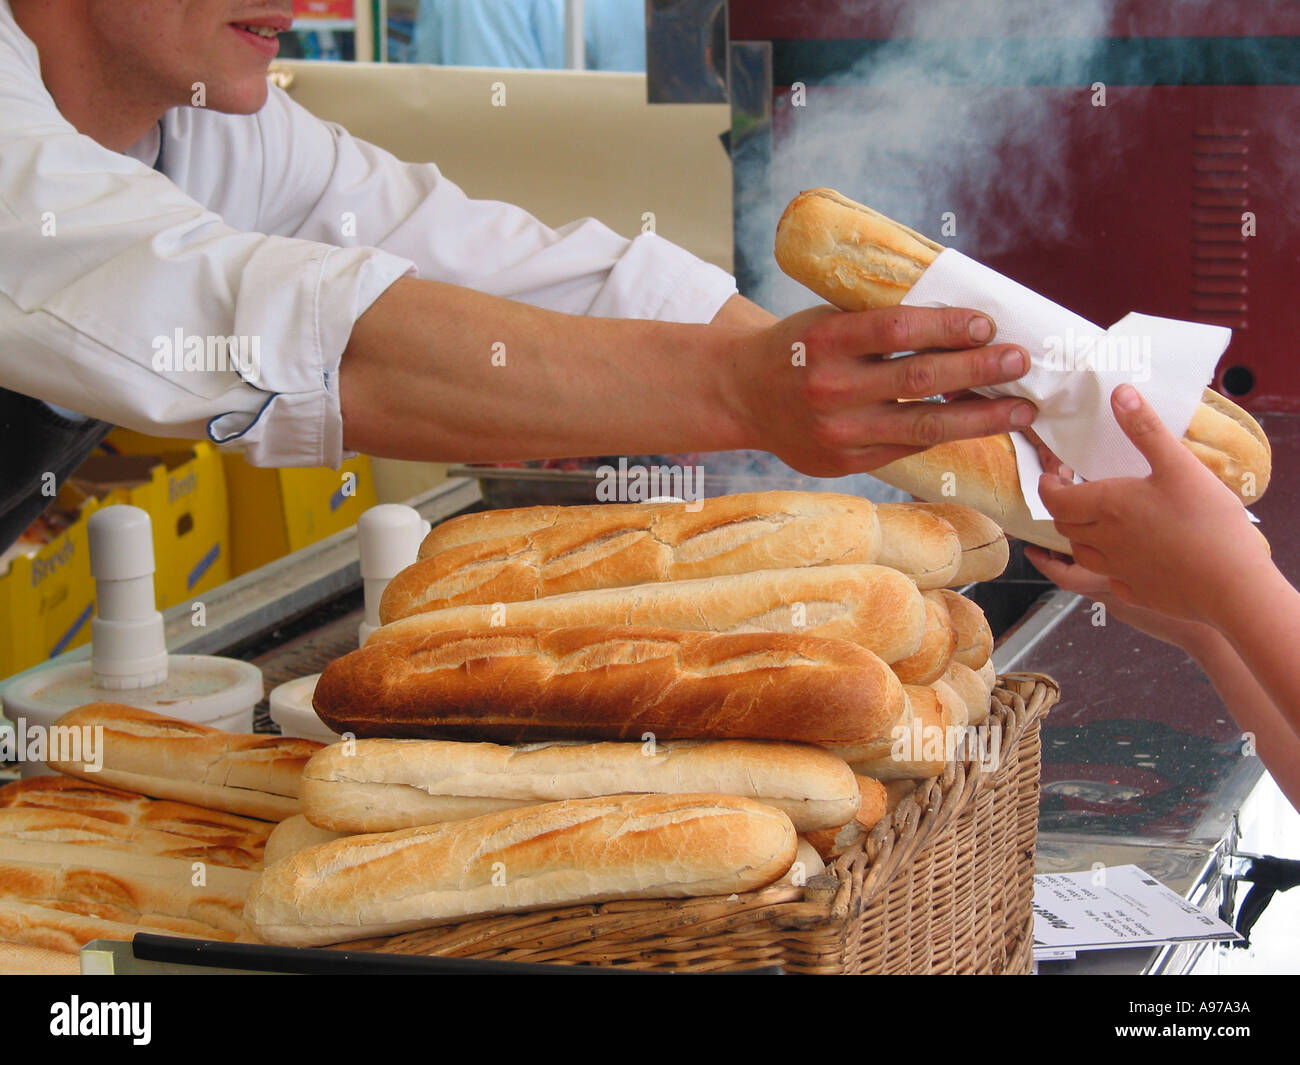 French Baguette Sandwich, French Sausage and Baguette Stall, Baguette de tradition françaisel, traditional bakeries Stock Photo